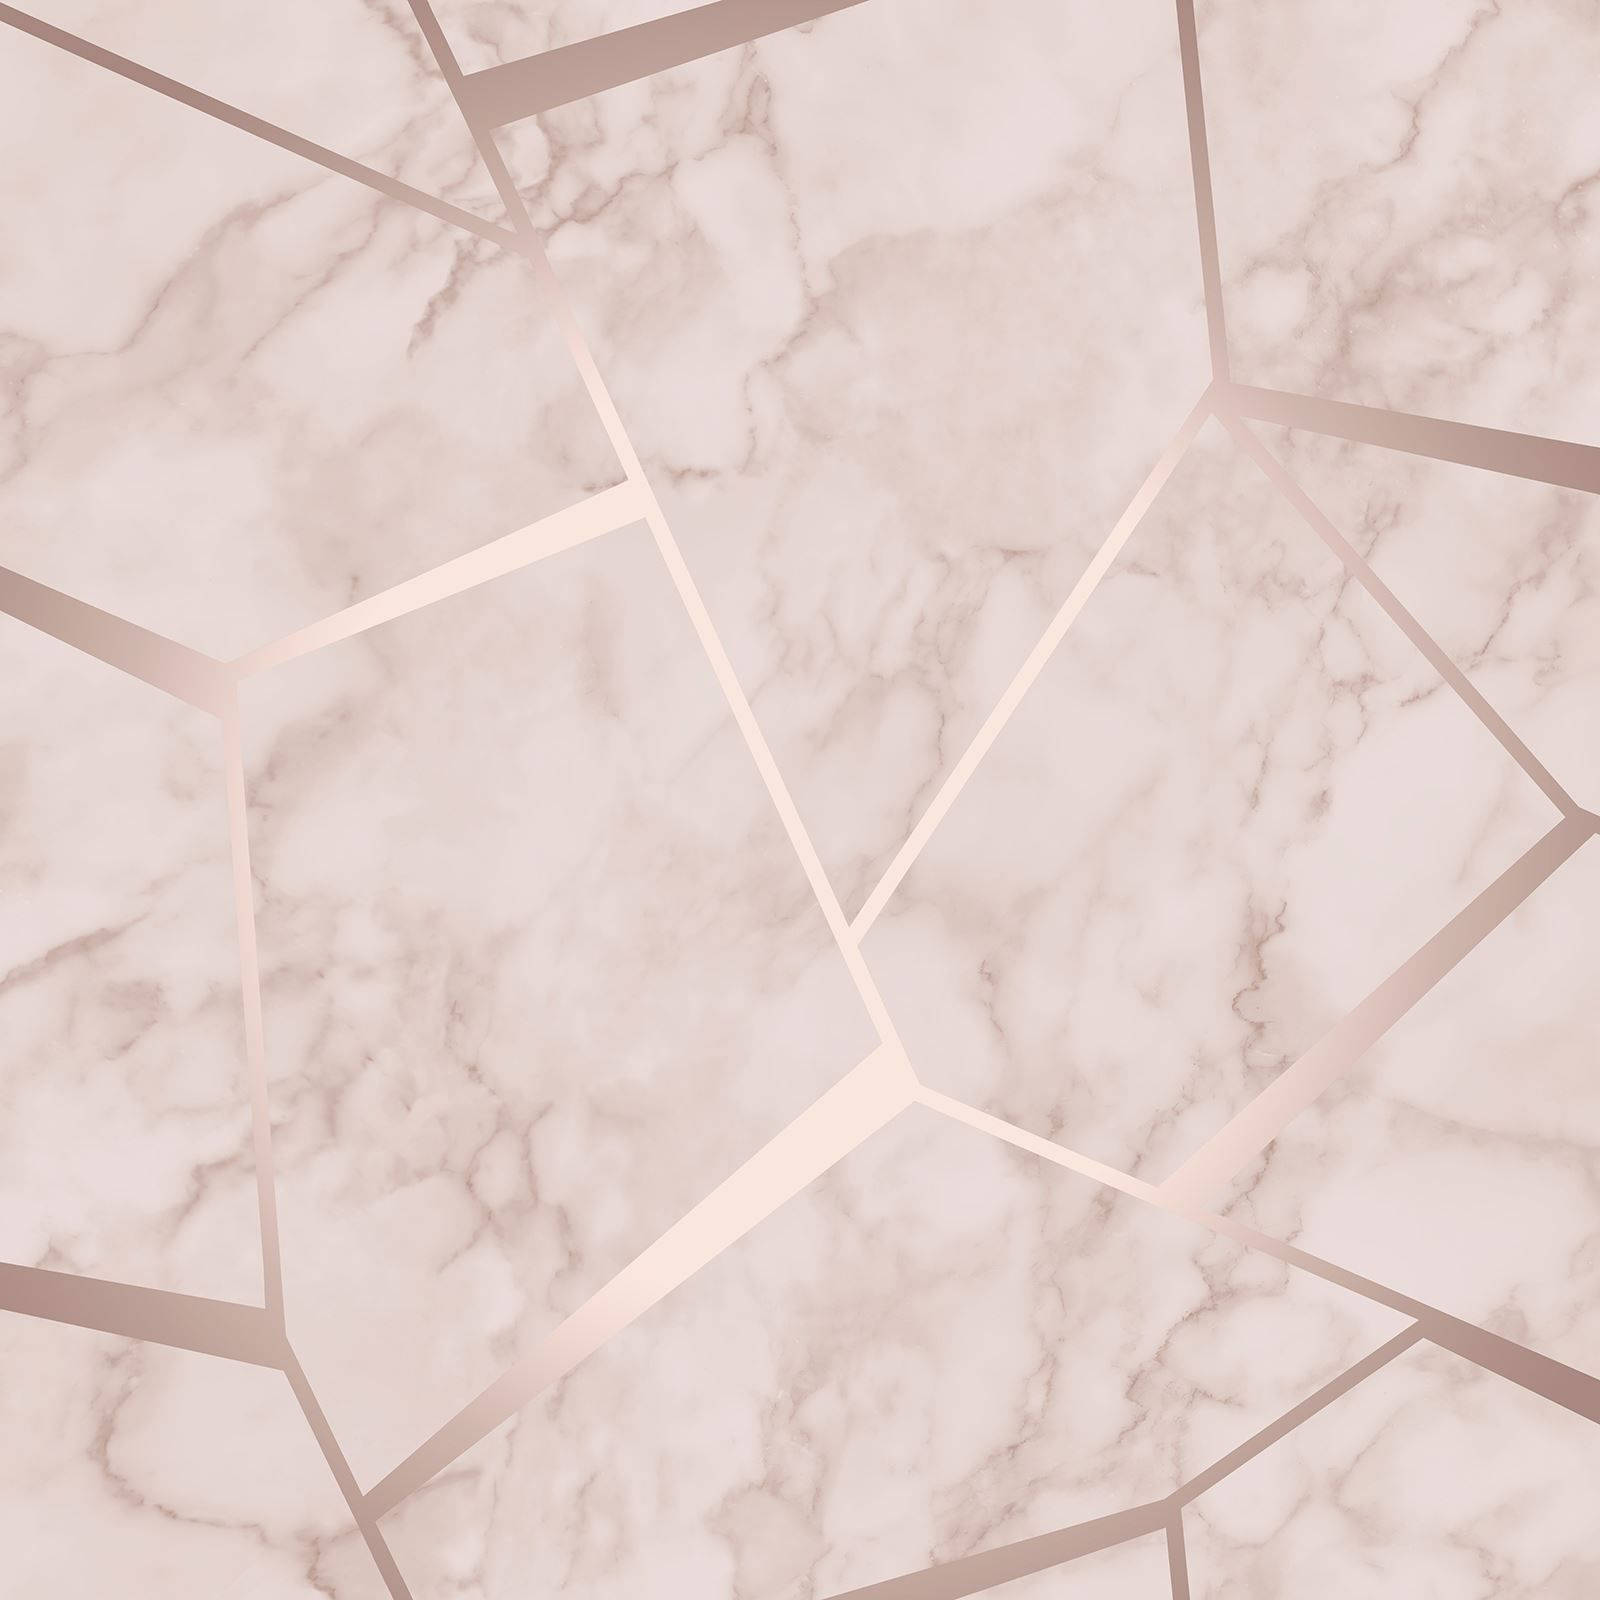 Caption: Exquisite Pink Marble With Geometric Lines Background